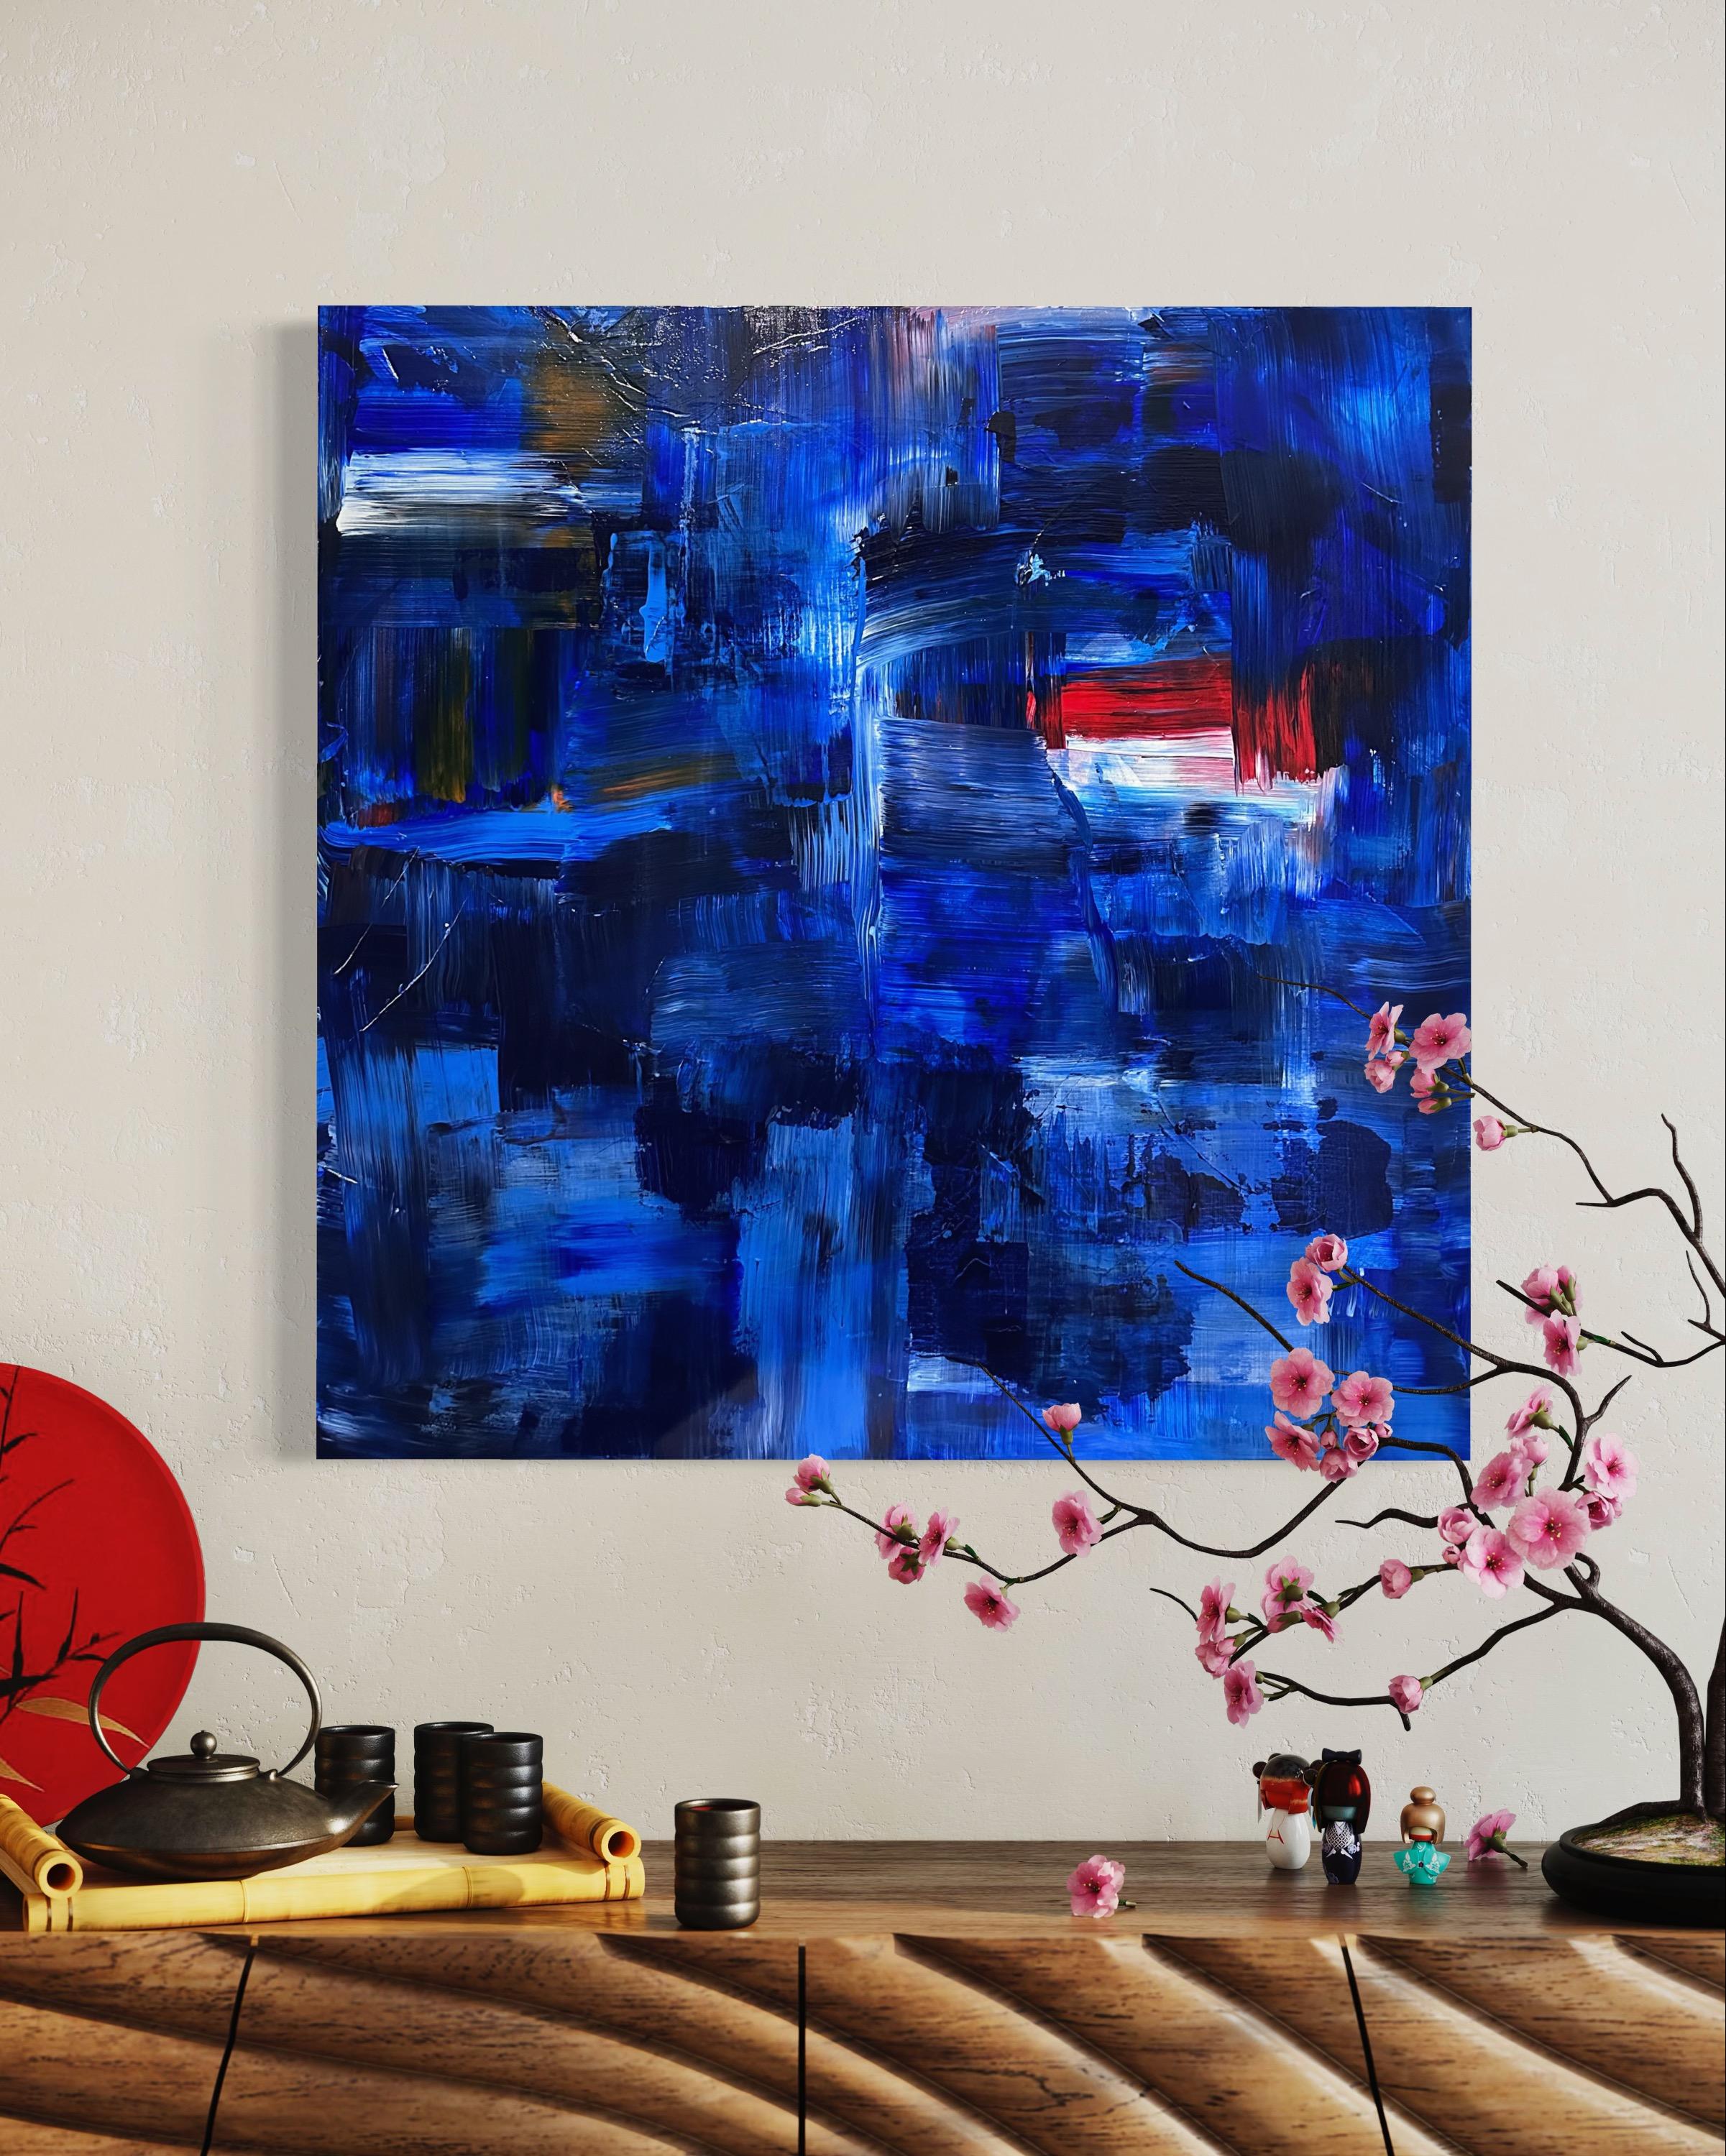 Kimberly Marney
What Lies Beneath - Red (Abstract, Blue, Cityscape, Red)
2023
Acrylic on Canvas
Size: 36x36x1.5in
Signed by hand
COA provided
Ref.: 924802-2007

Tags: Abstract, Blue, Cityscape, Red

Abstracted layers of blues and pops of yellow and